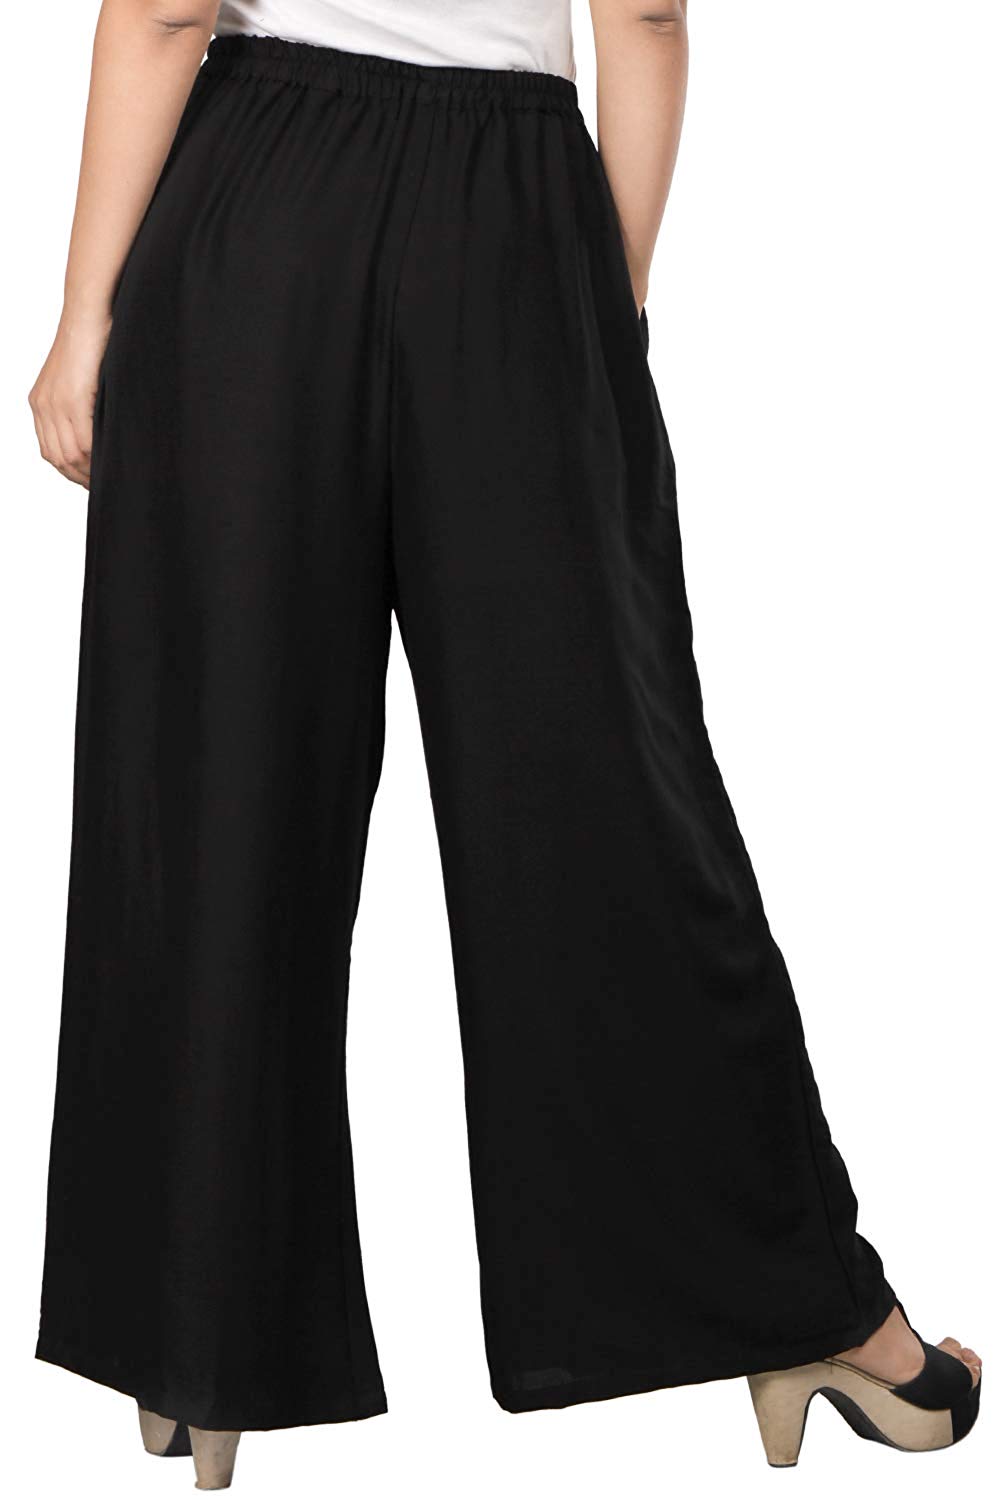 Buy Palazzo pant or palazoo trousers for teen,ladis and for women ...